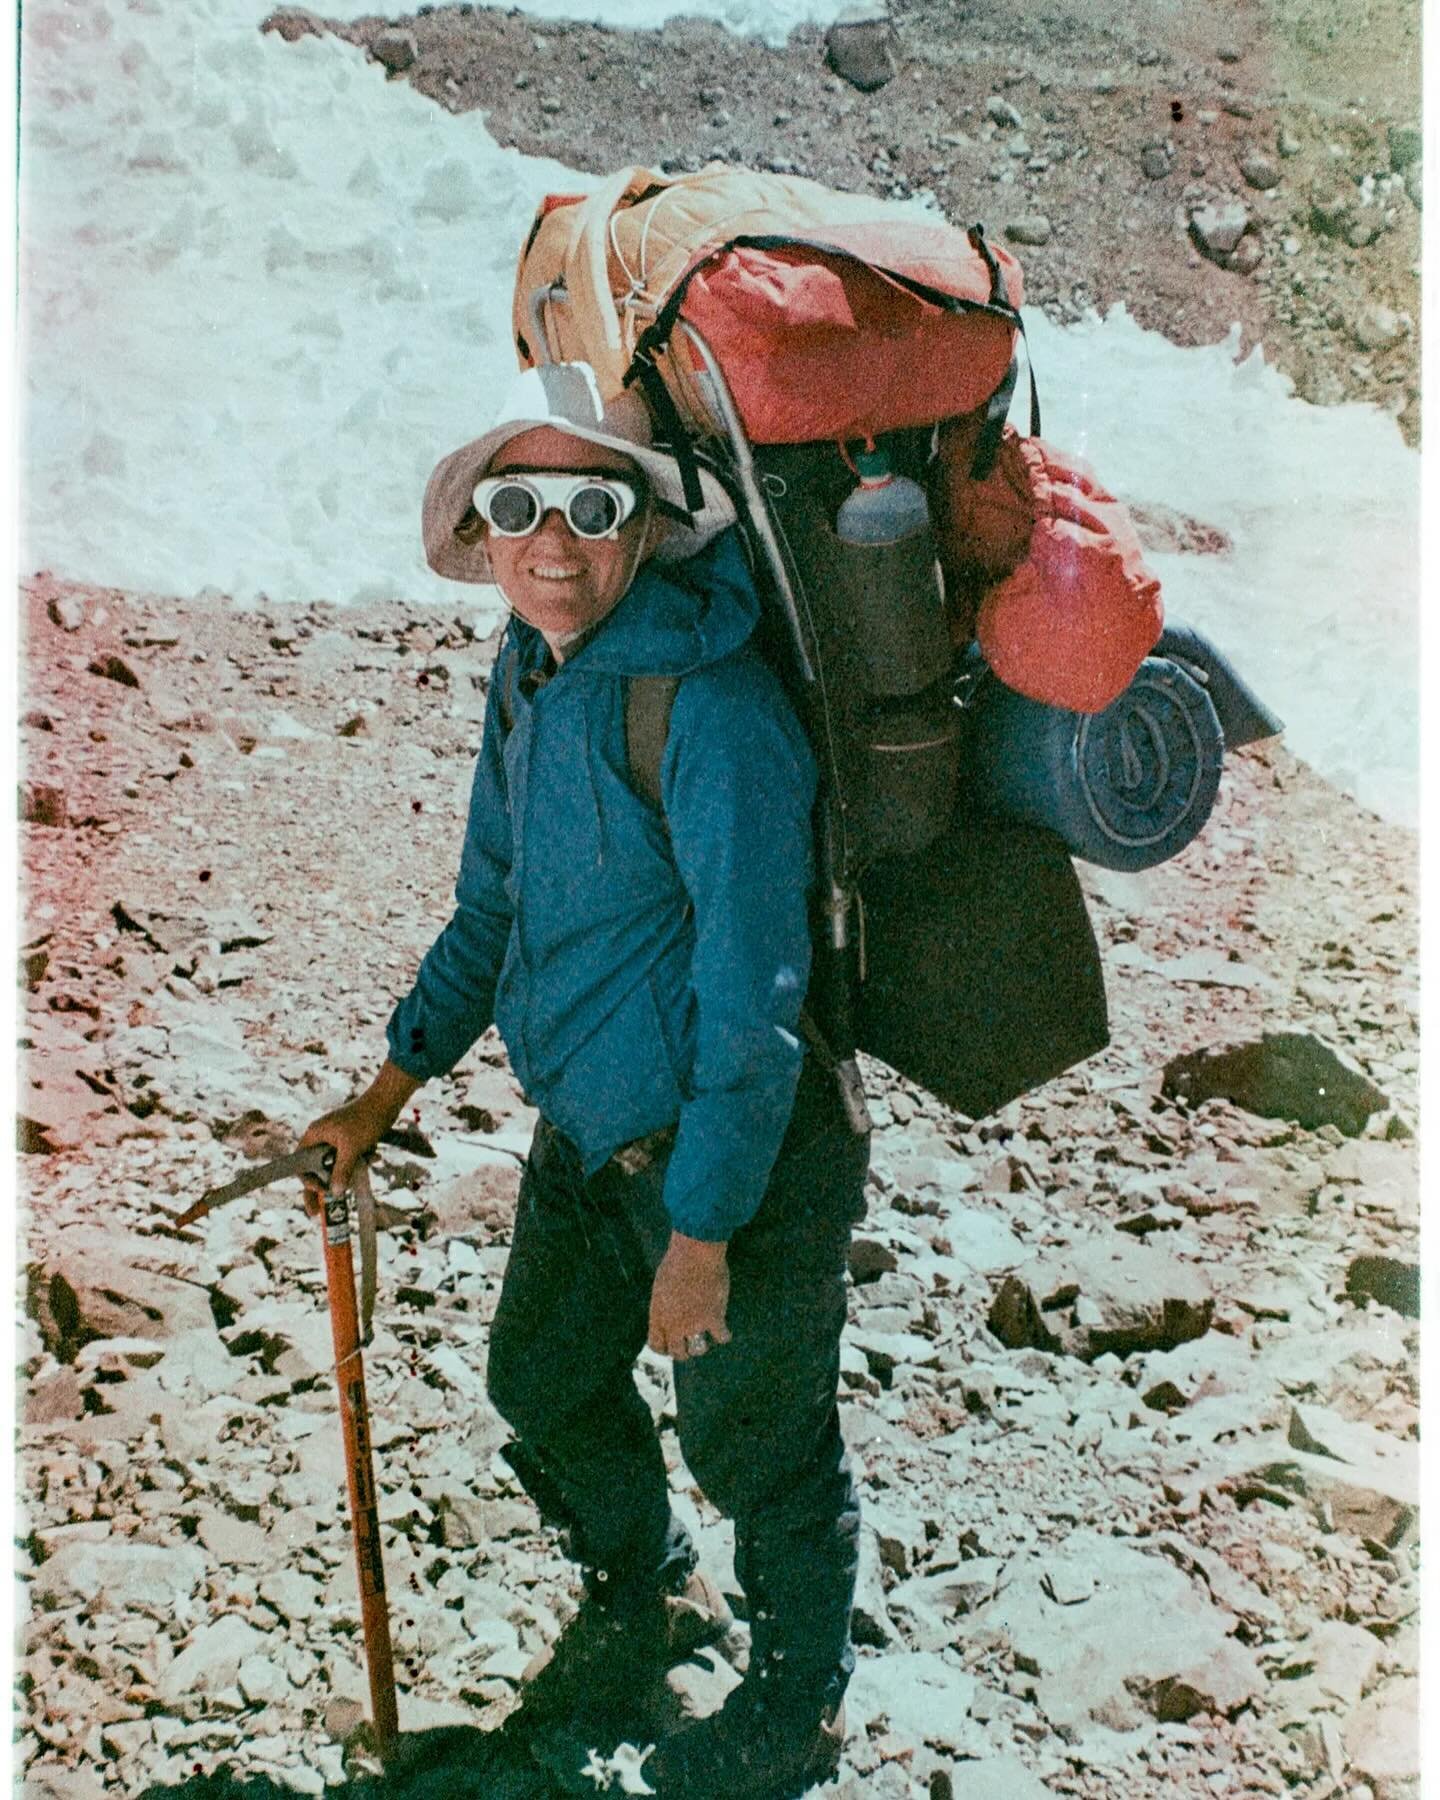 Mishap or Murder? Aconcagua Provincial Park. April Outsiders Only Bonus.

1. Janet Johnson
2. The expedition team as they leave for Aconcagua 
3. John Cooper
4. Cooper, Johnson and McMillen 
5. Last photo on Janet Johnson&rsquo;s camera
6. Janet&rsqu